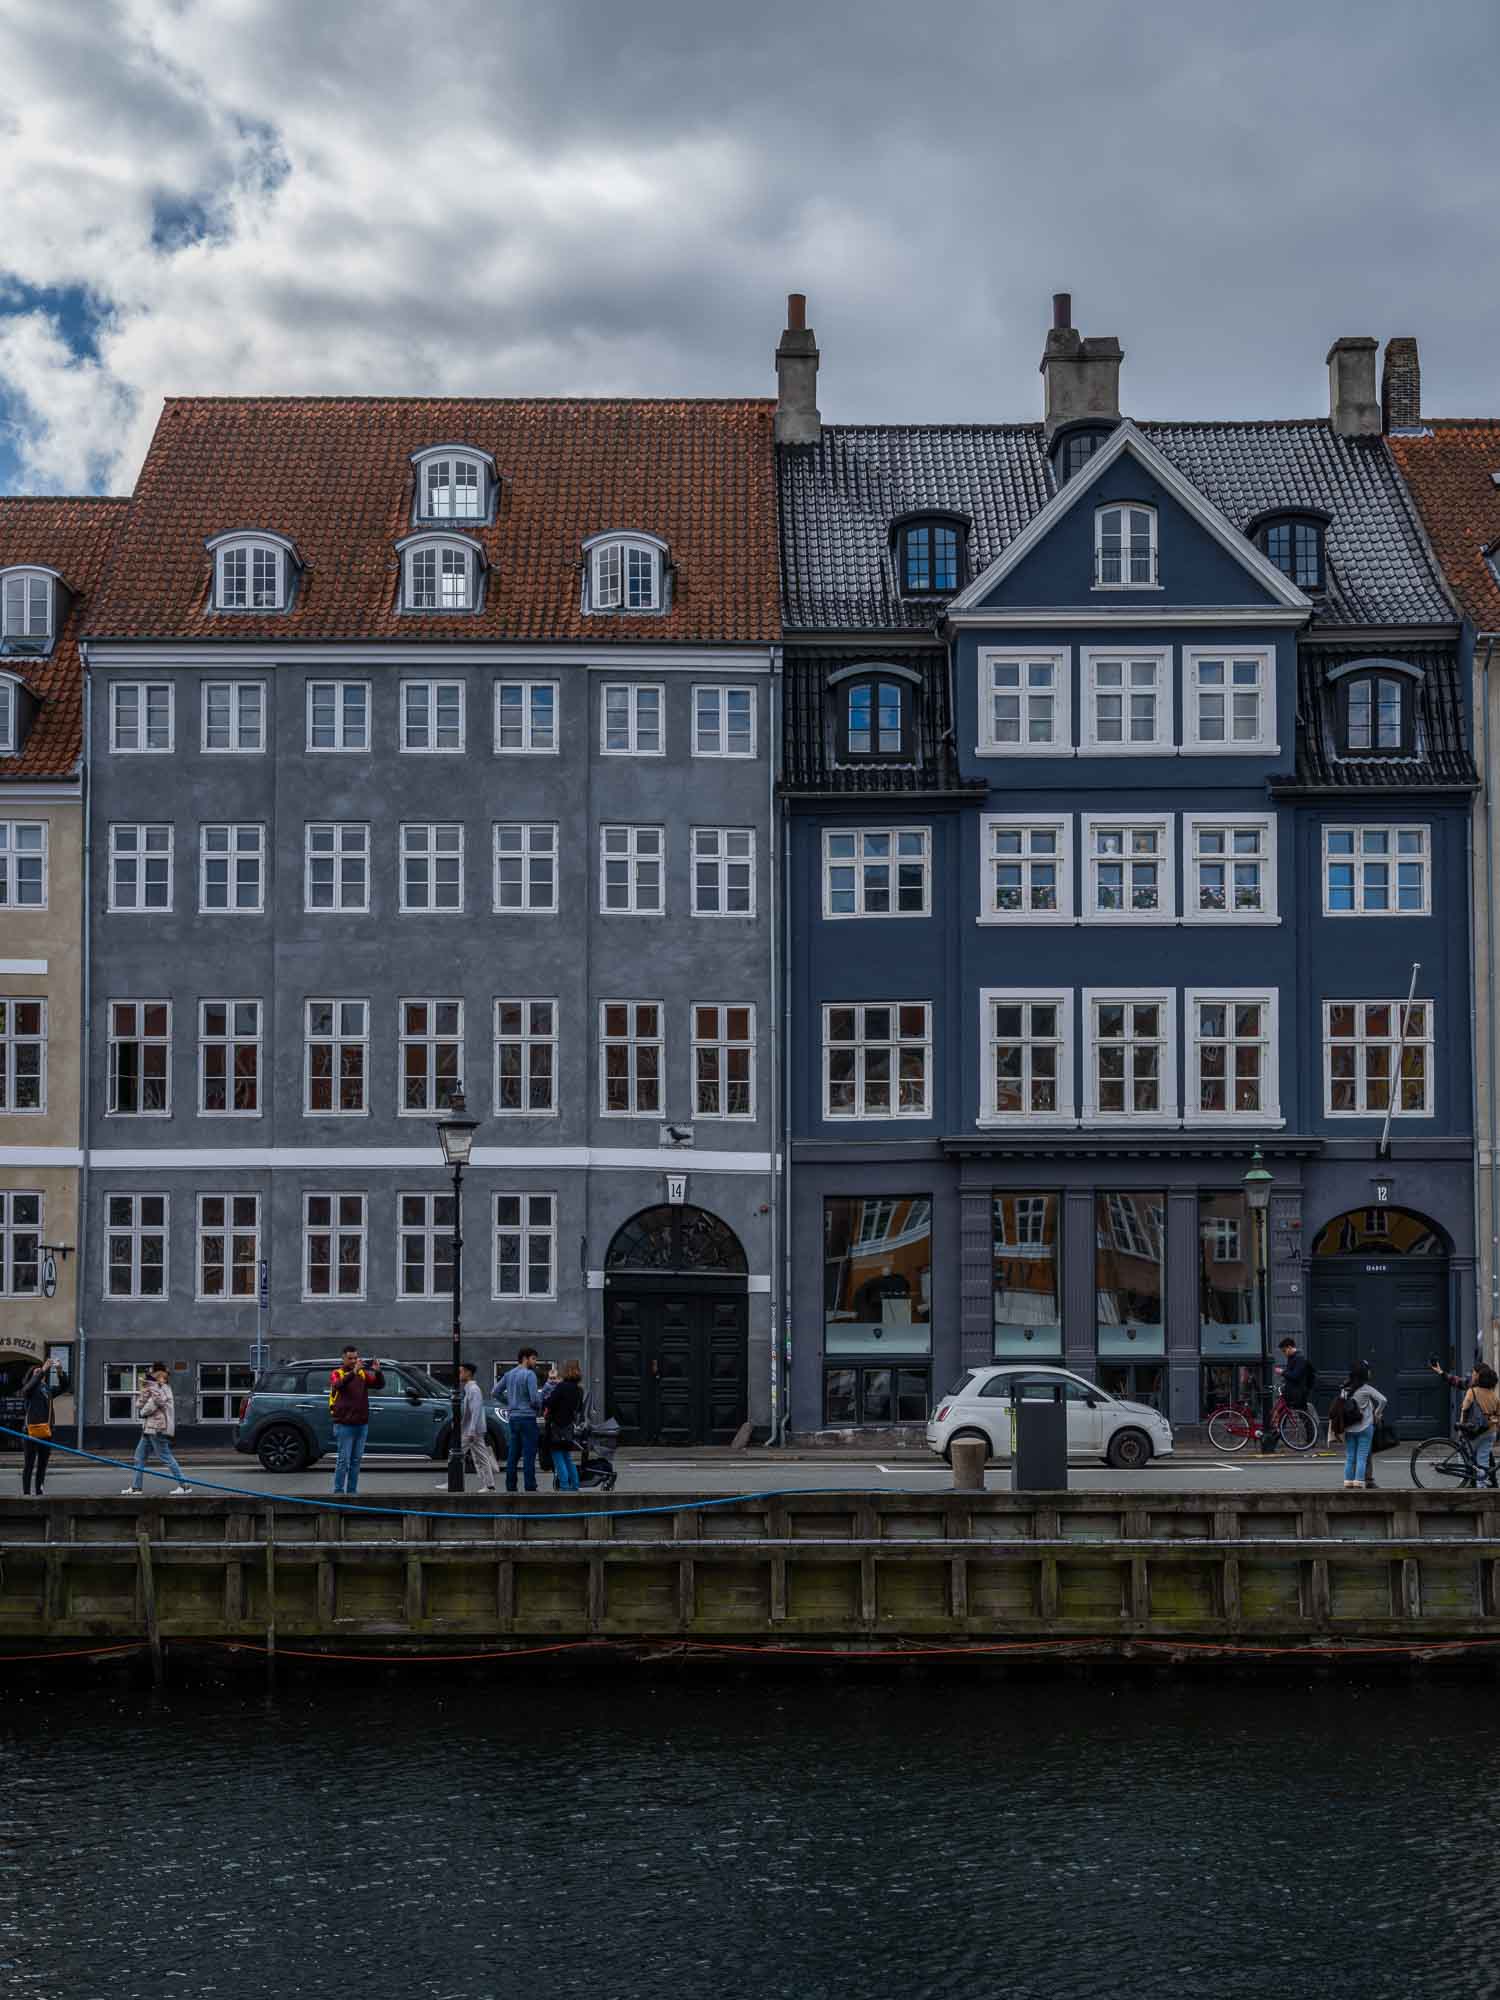 Colorful buildings along the Nyhavn canal in Copenhagen, with people walking and bikes lining the harborside.